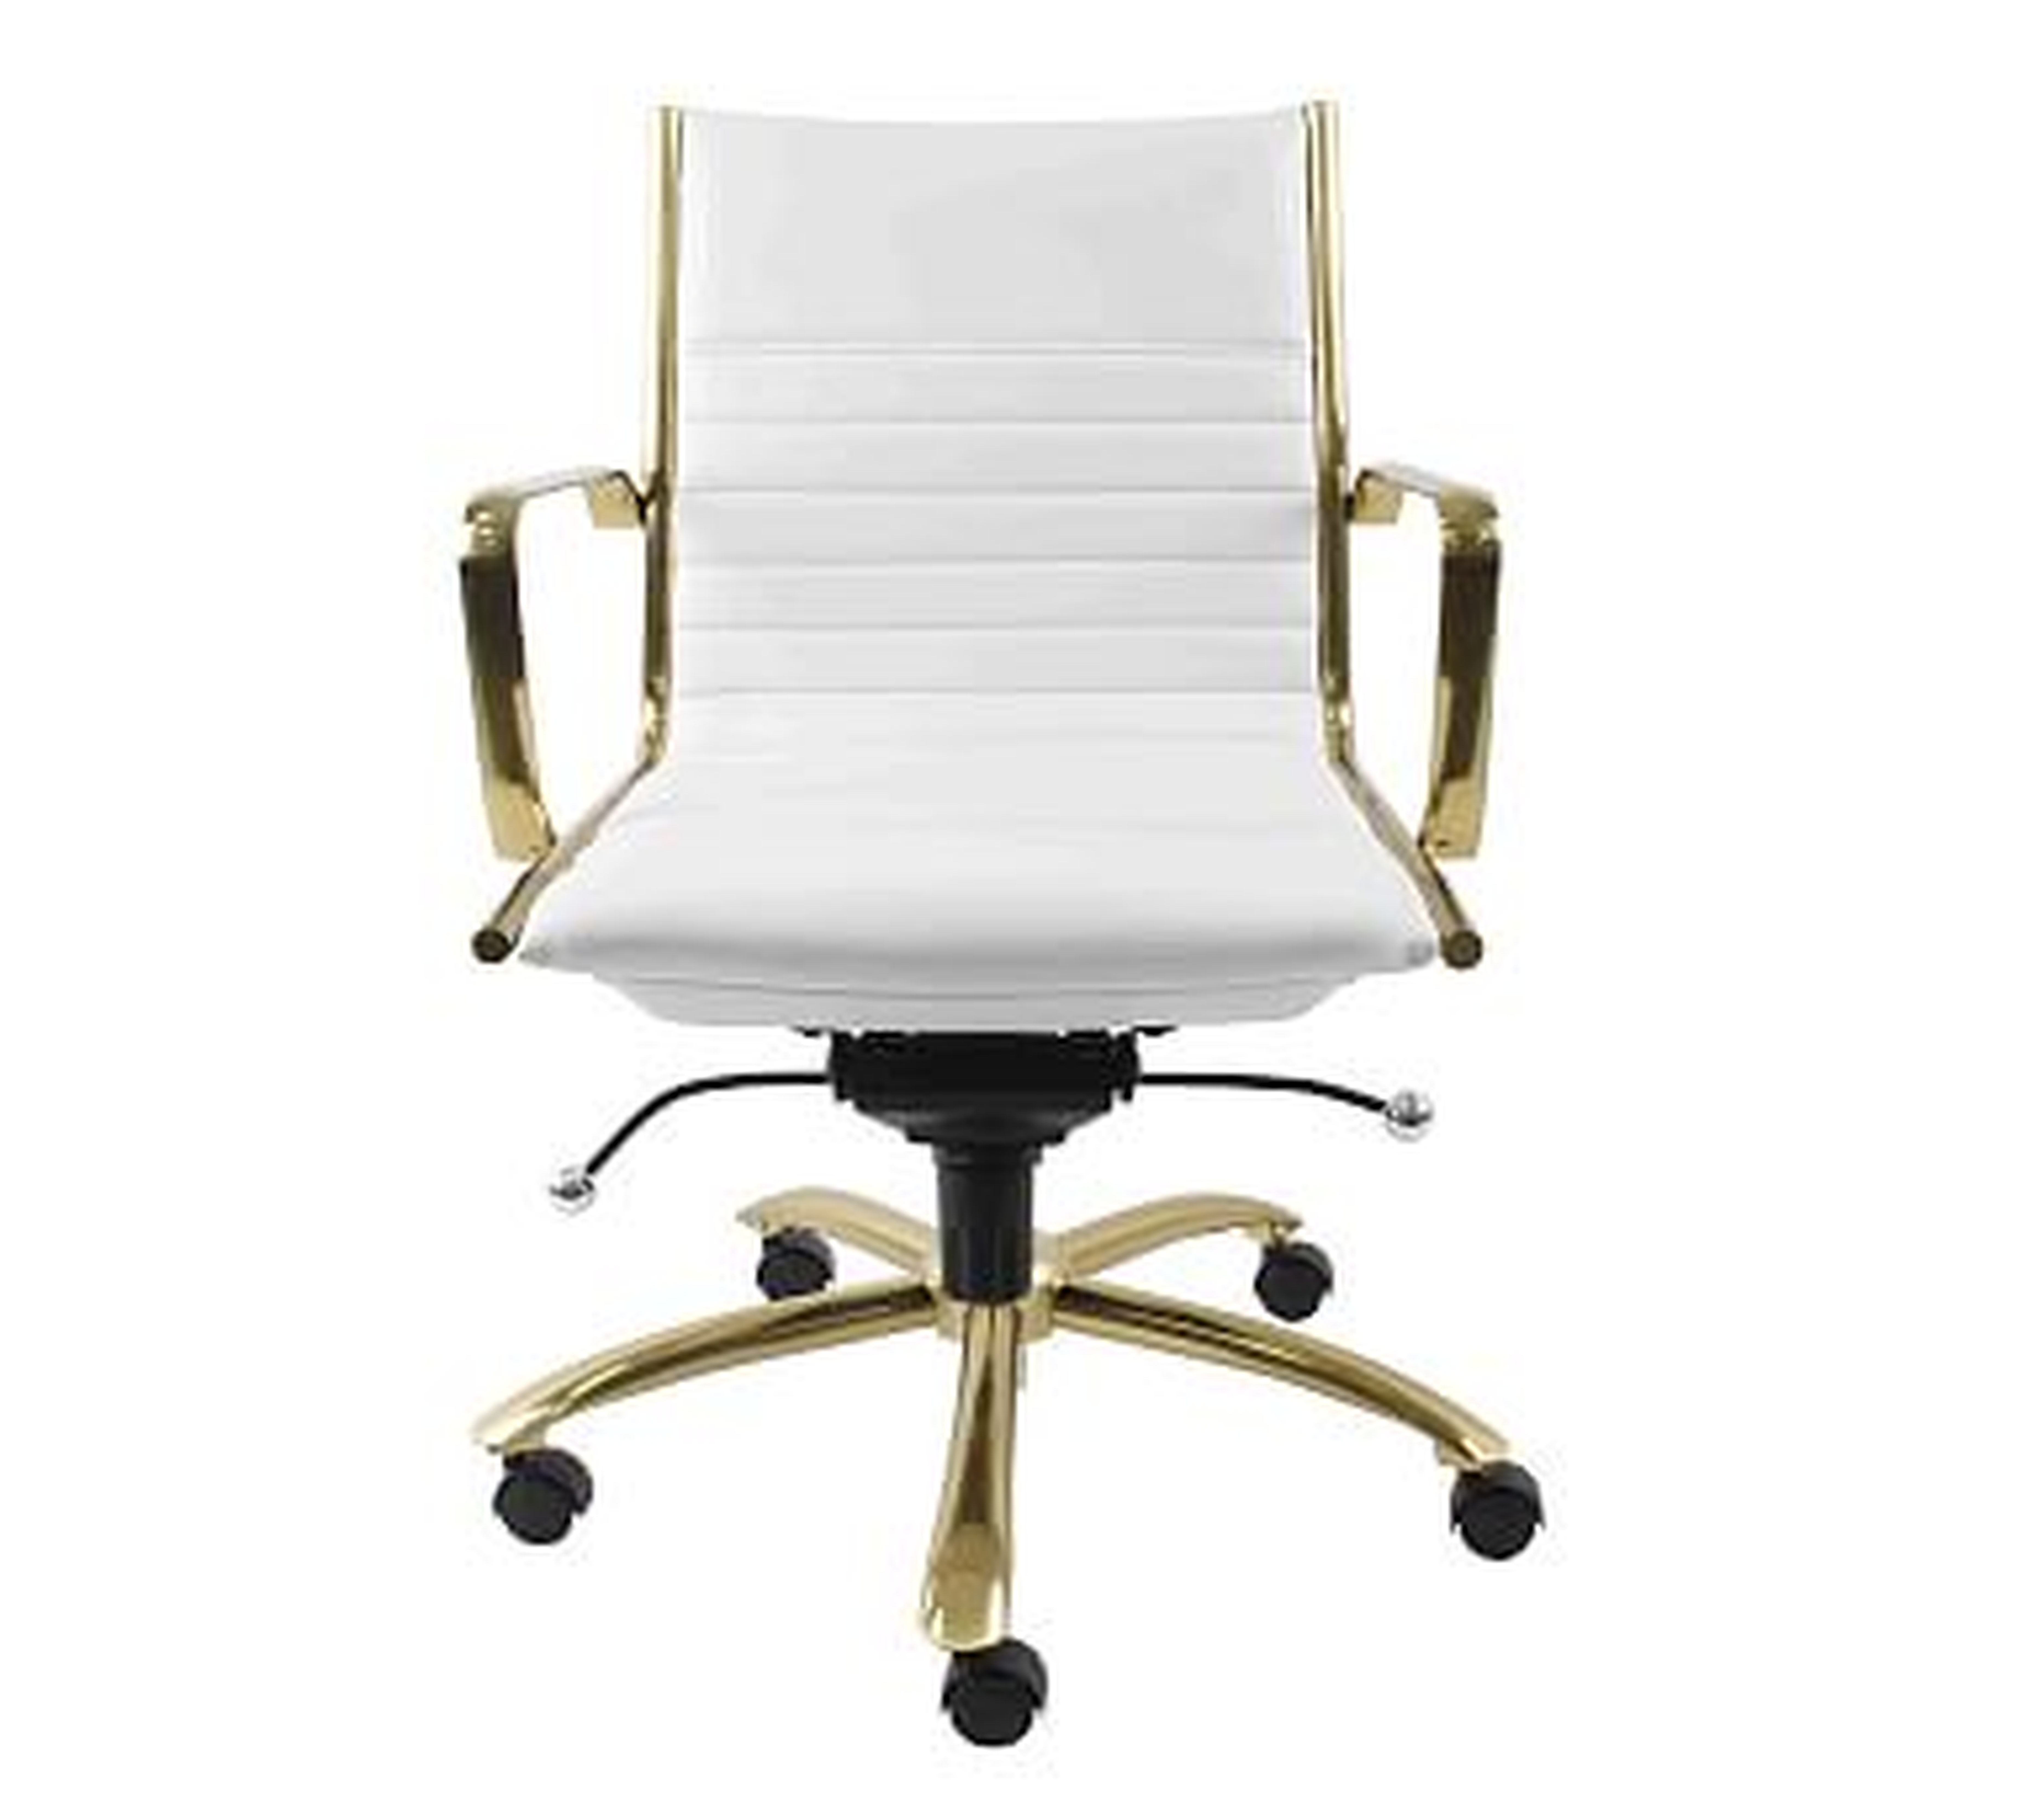 Fowler Low Back Desk Chair, White/Gold - Pottery Barn